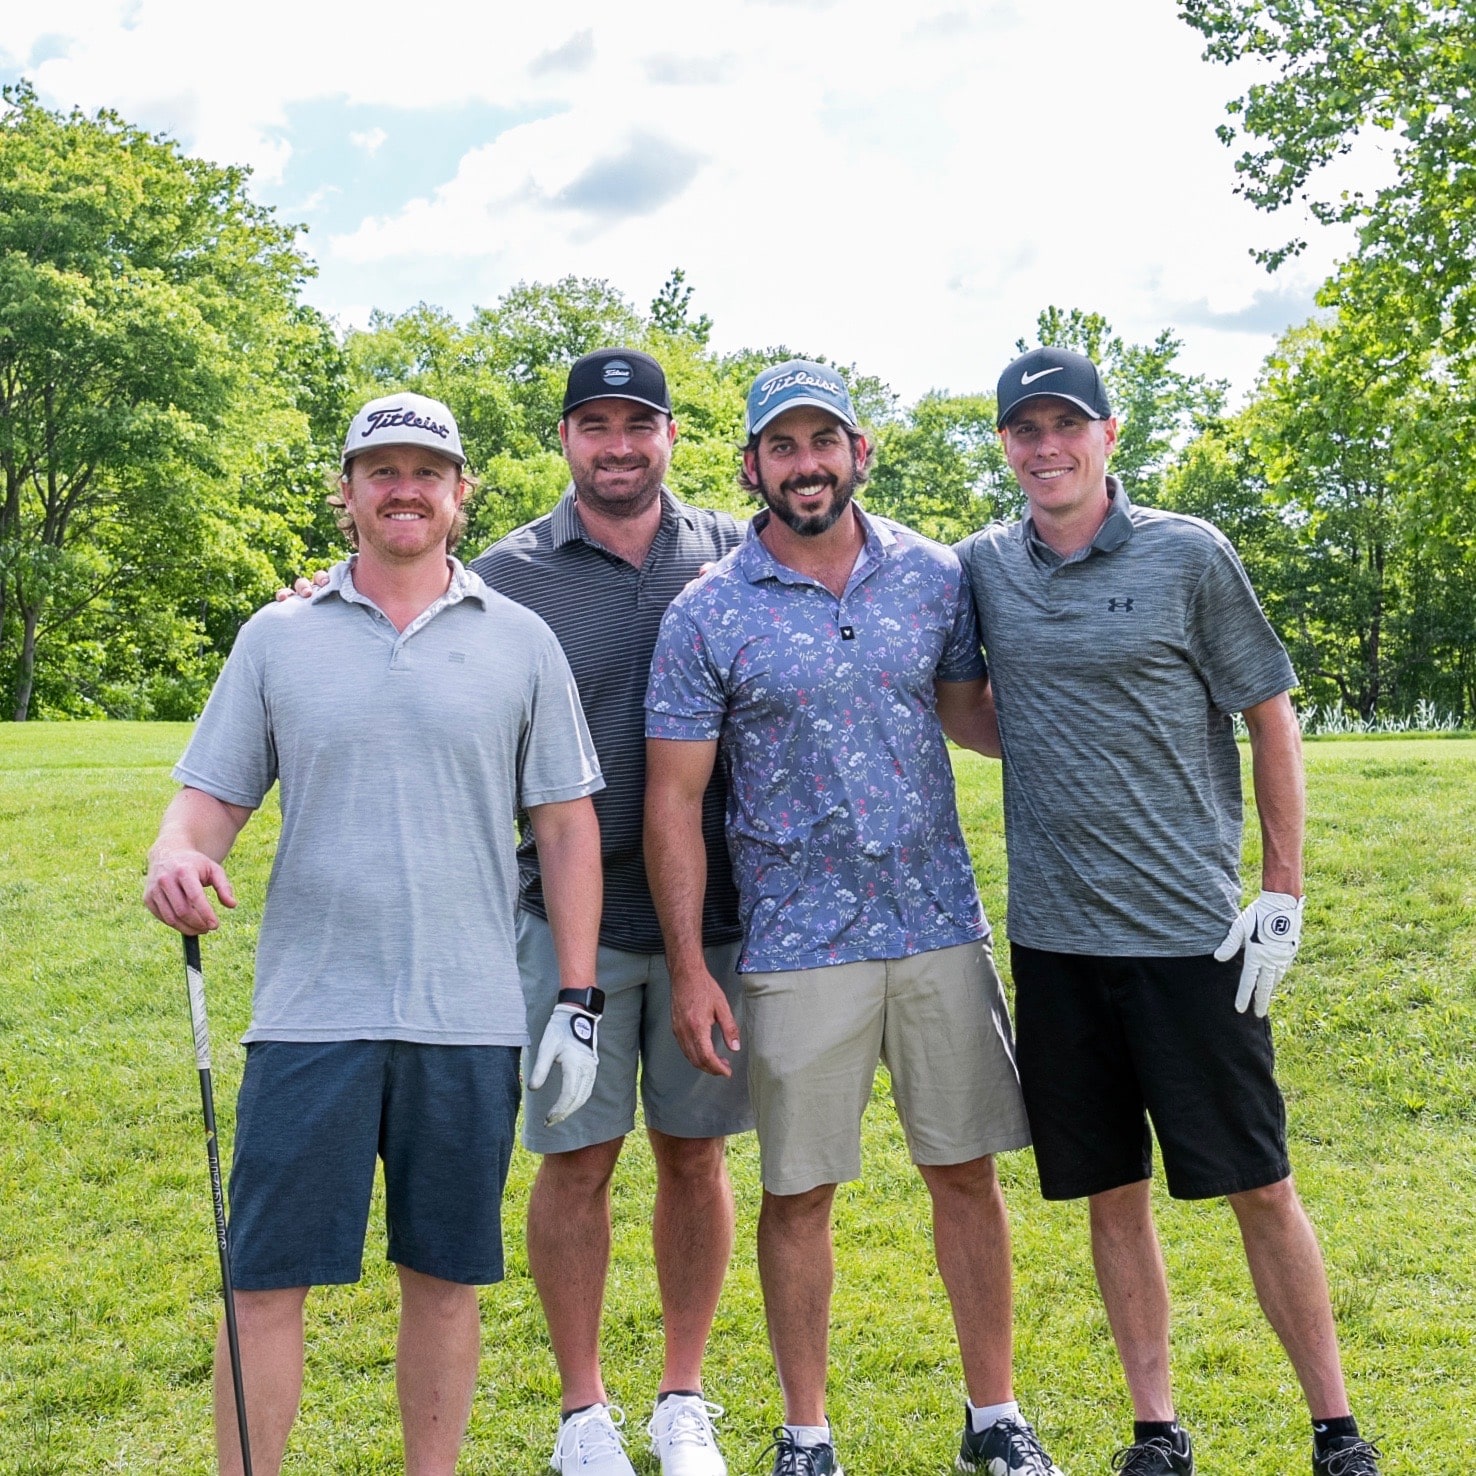 Four men posing together at a golf course